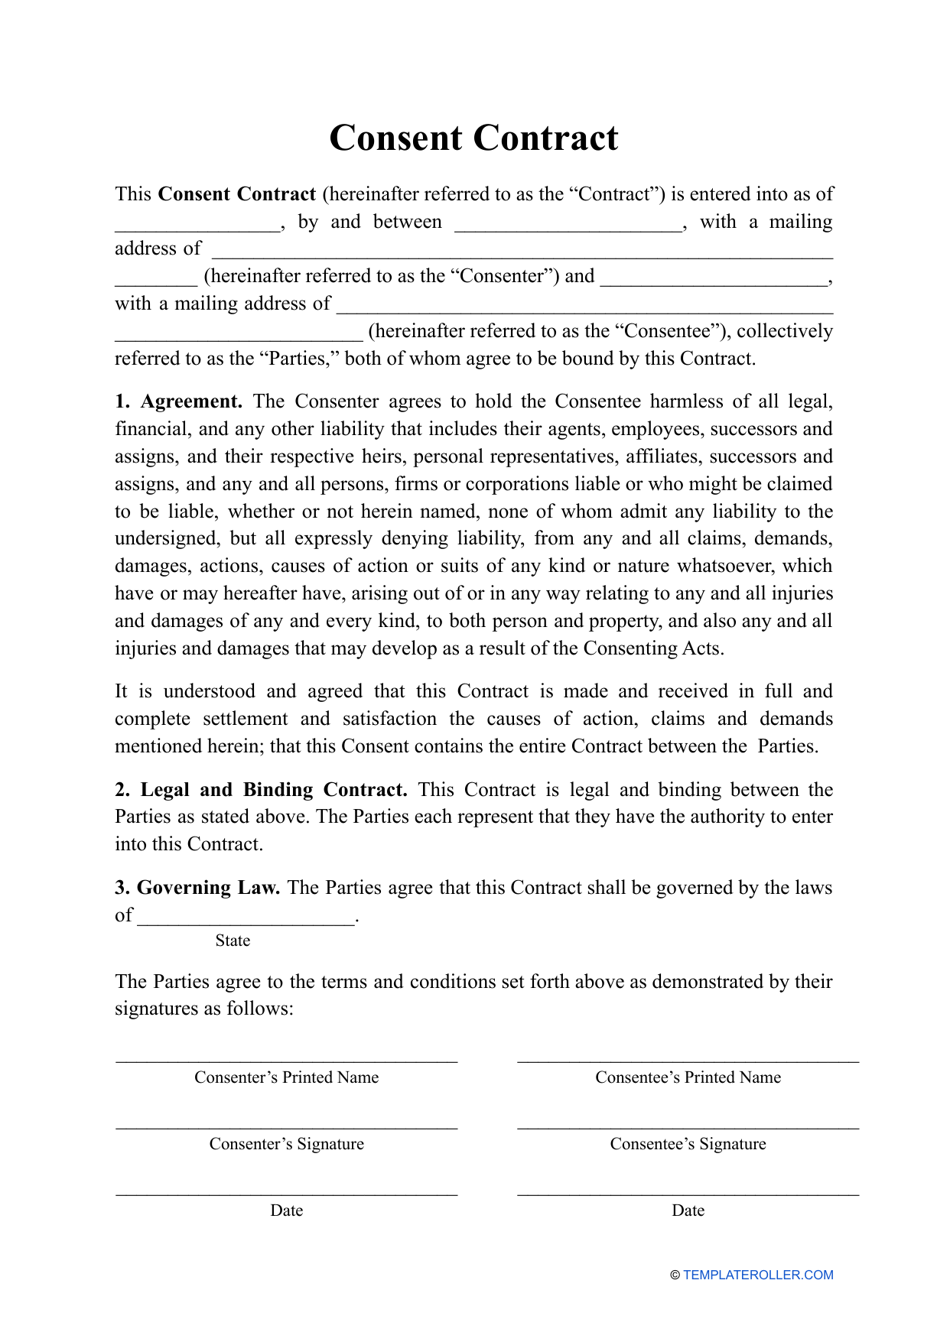 Consent Contract Template, Page 1